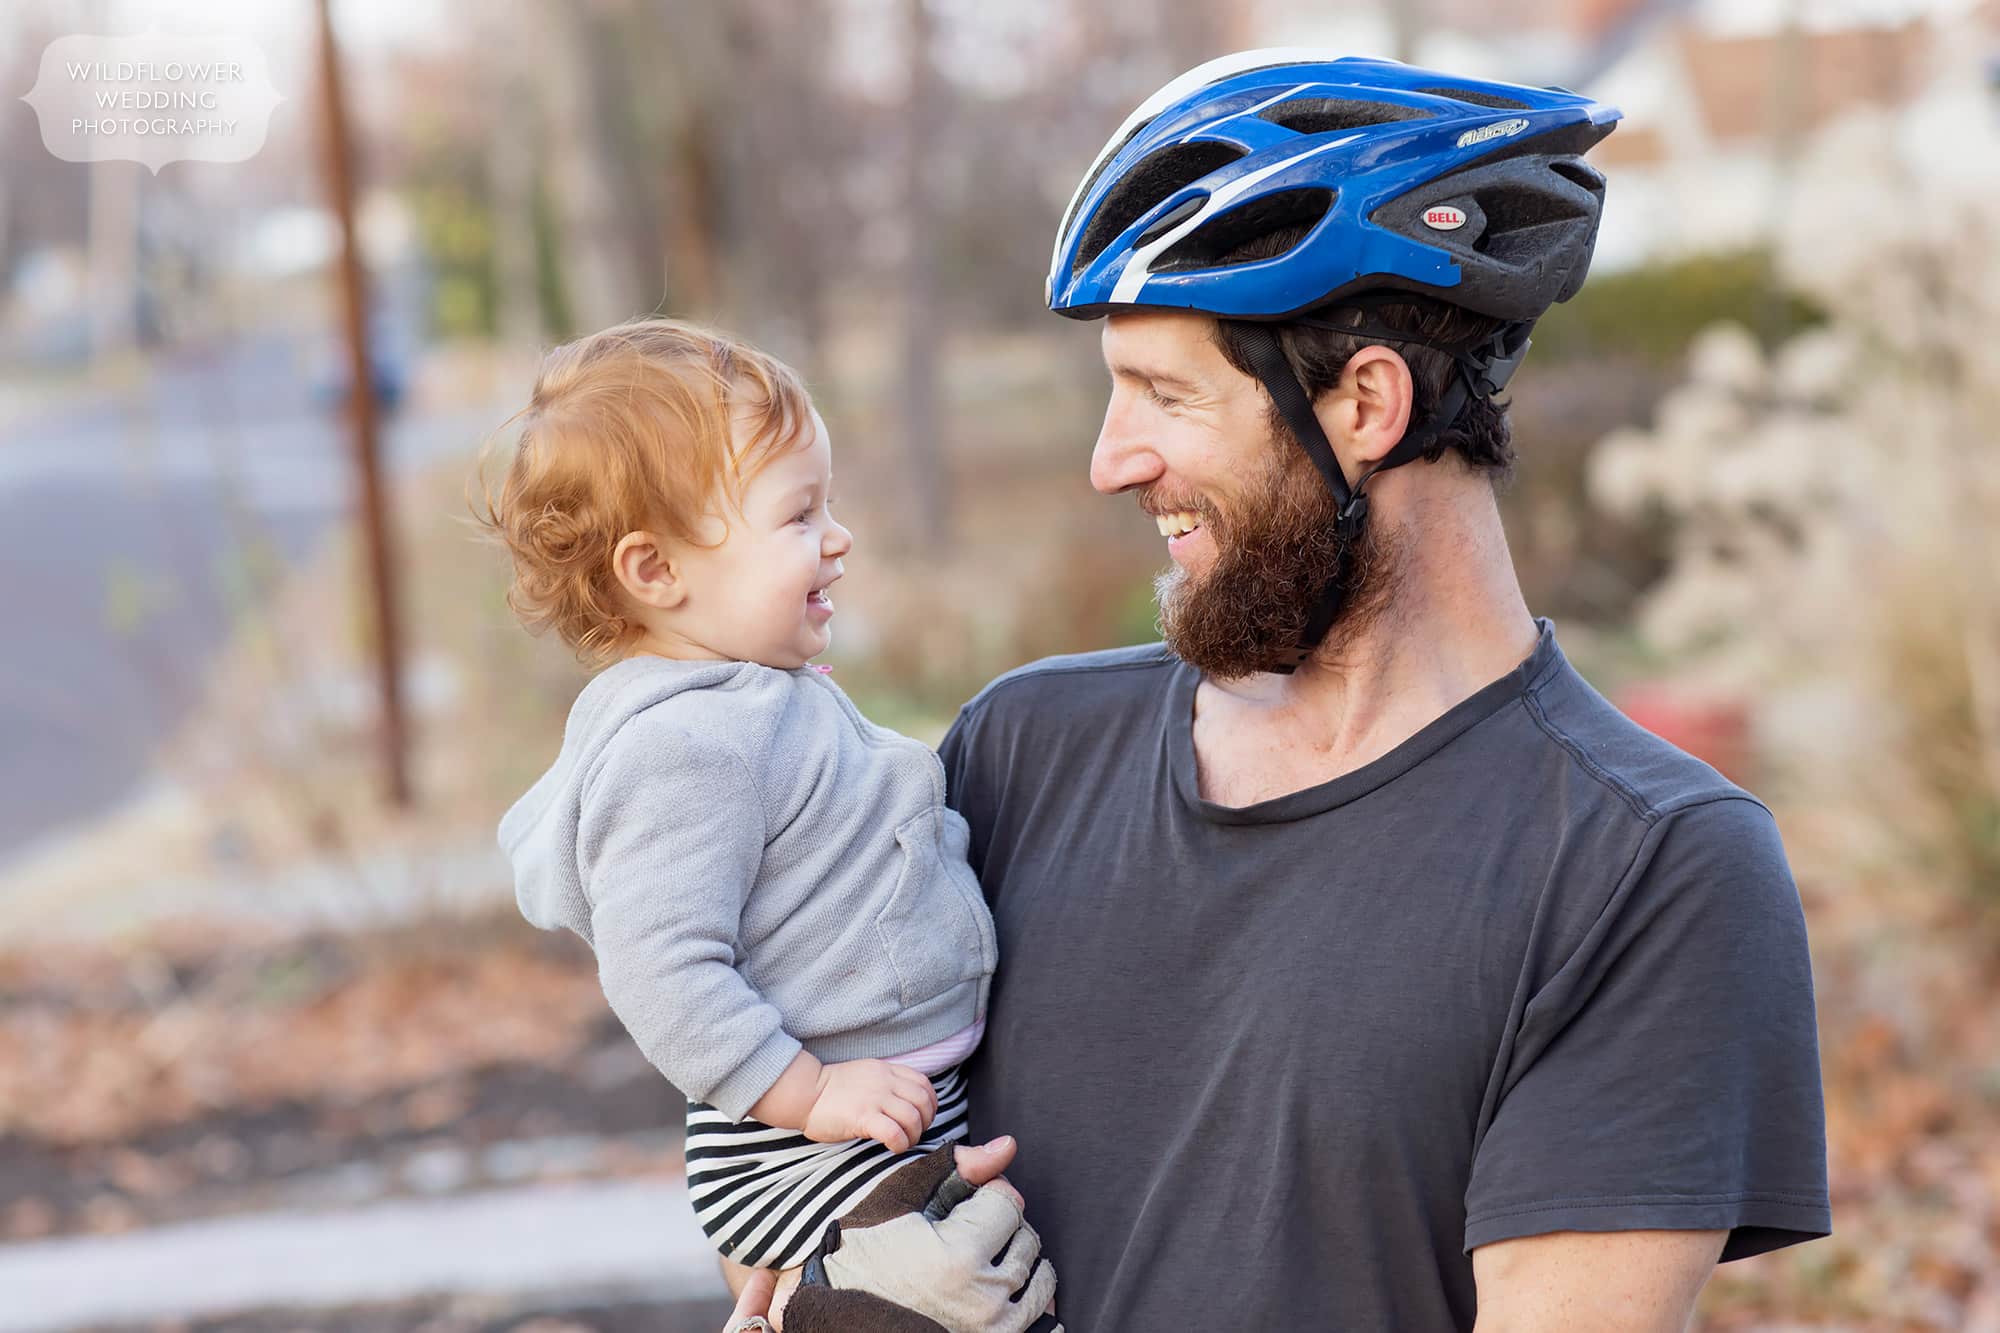 This outdoorsy family photography session with dad in bicycle helmet holding his baby.